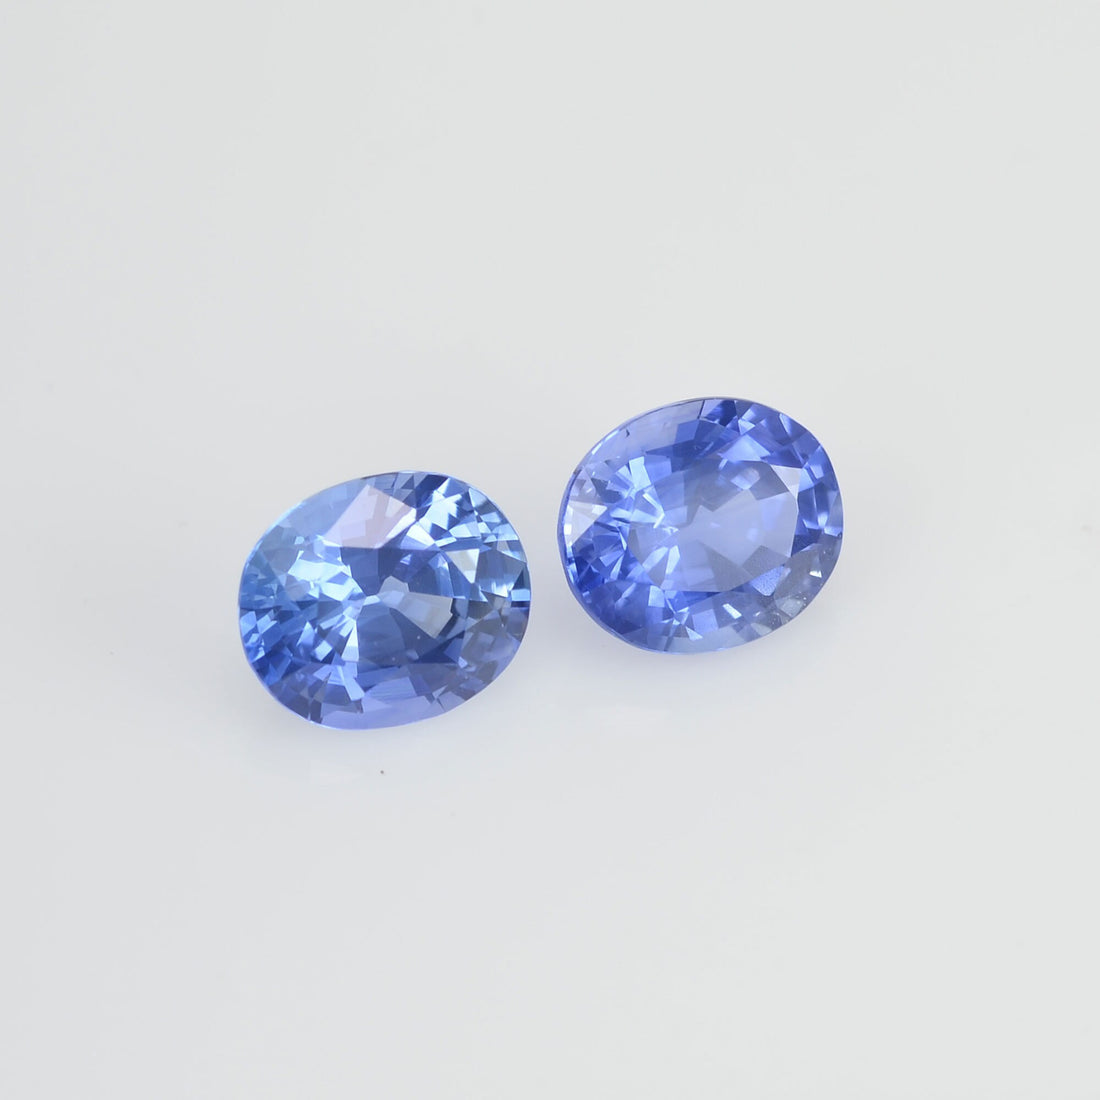 1.70 cts Natural Blue Sapphire Loose Pair Gemstone Oval Cut